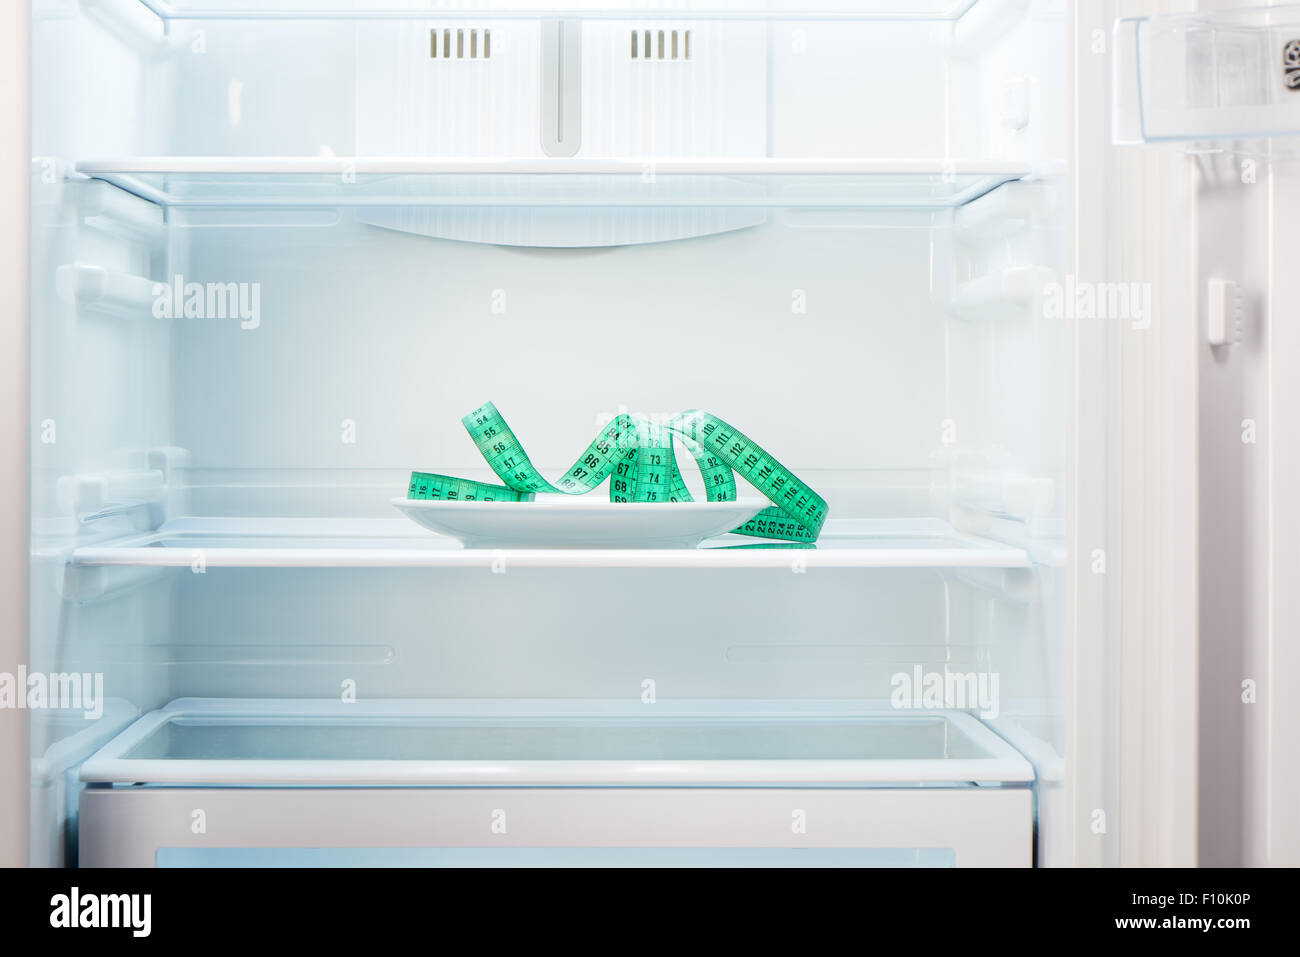 Green measuring tape on white plate in open empty refrigerator. Weight loss diet concept. Stock Photo